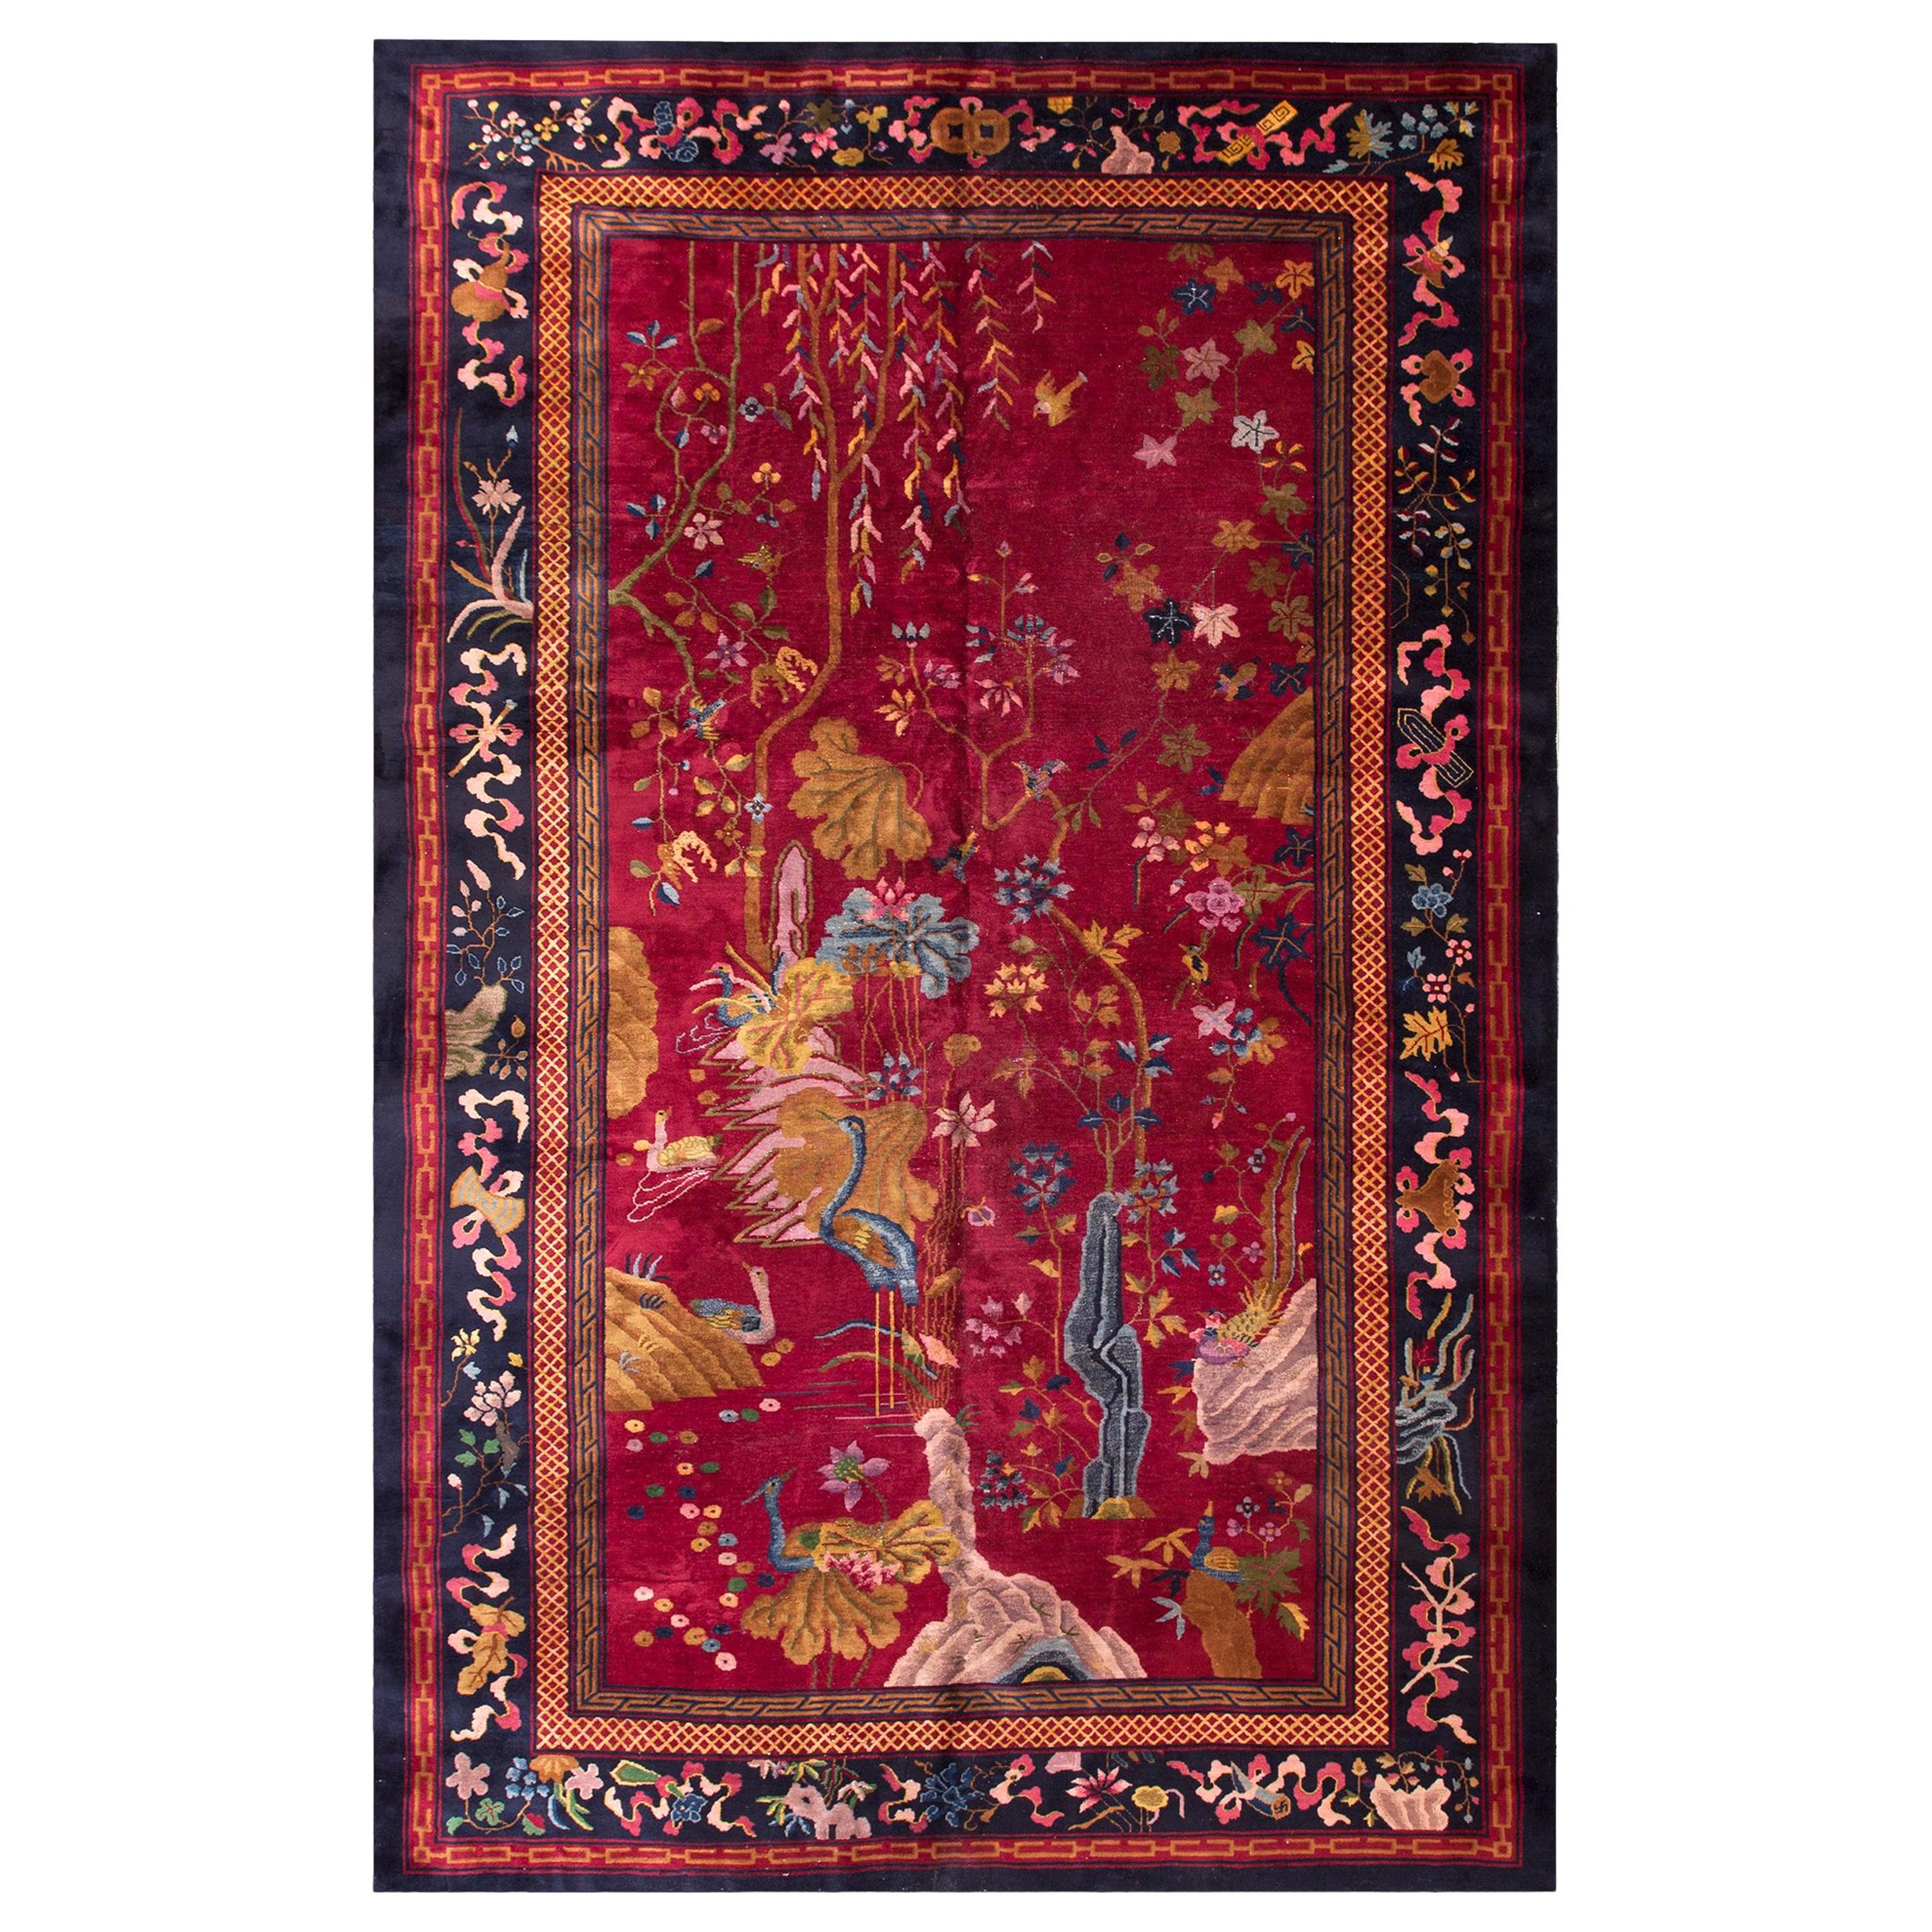 1920s Chinese Art Deco Carpet ( 9' x 14' - 274 x 427 ) For Sale